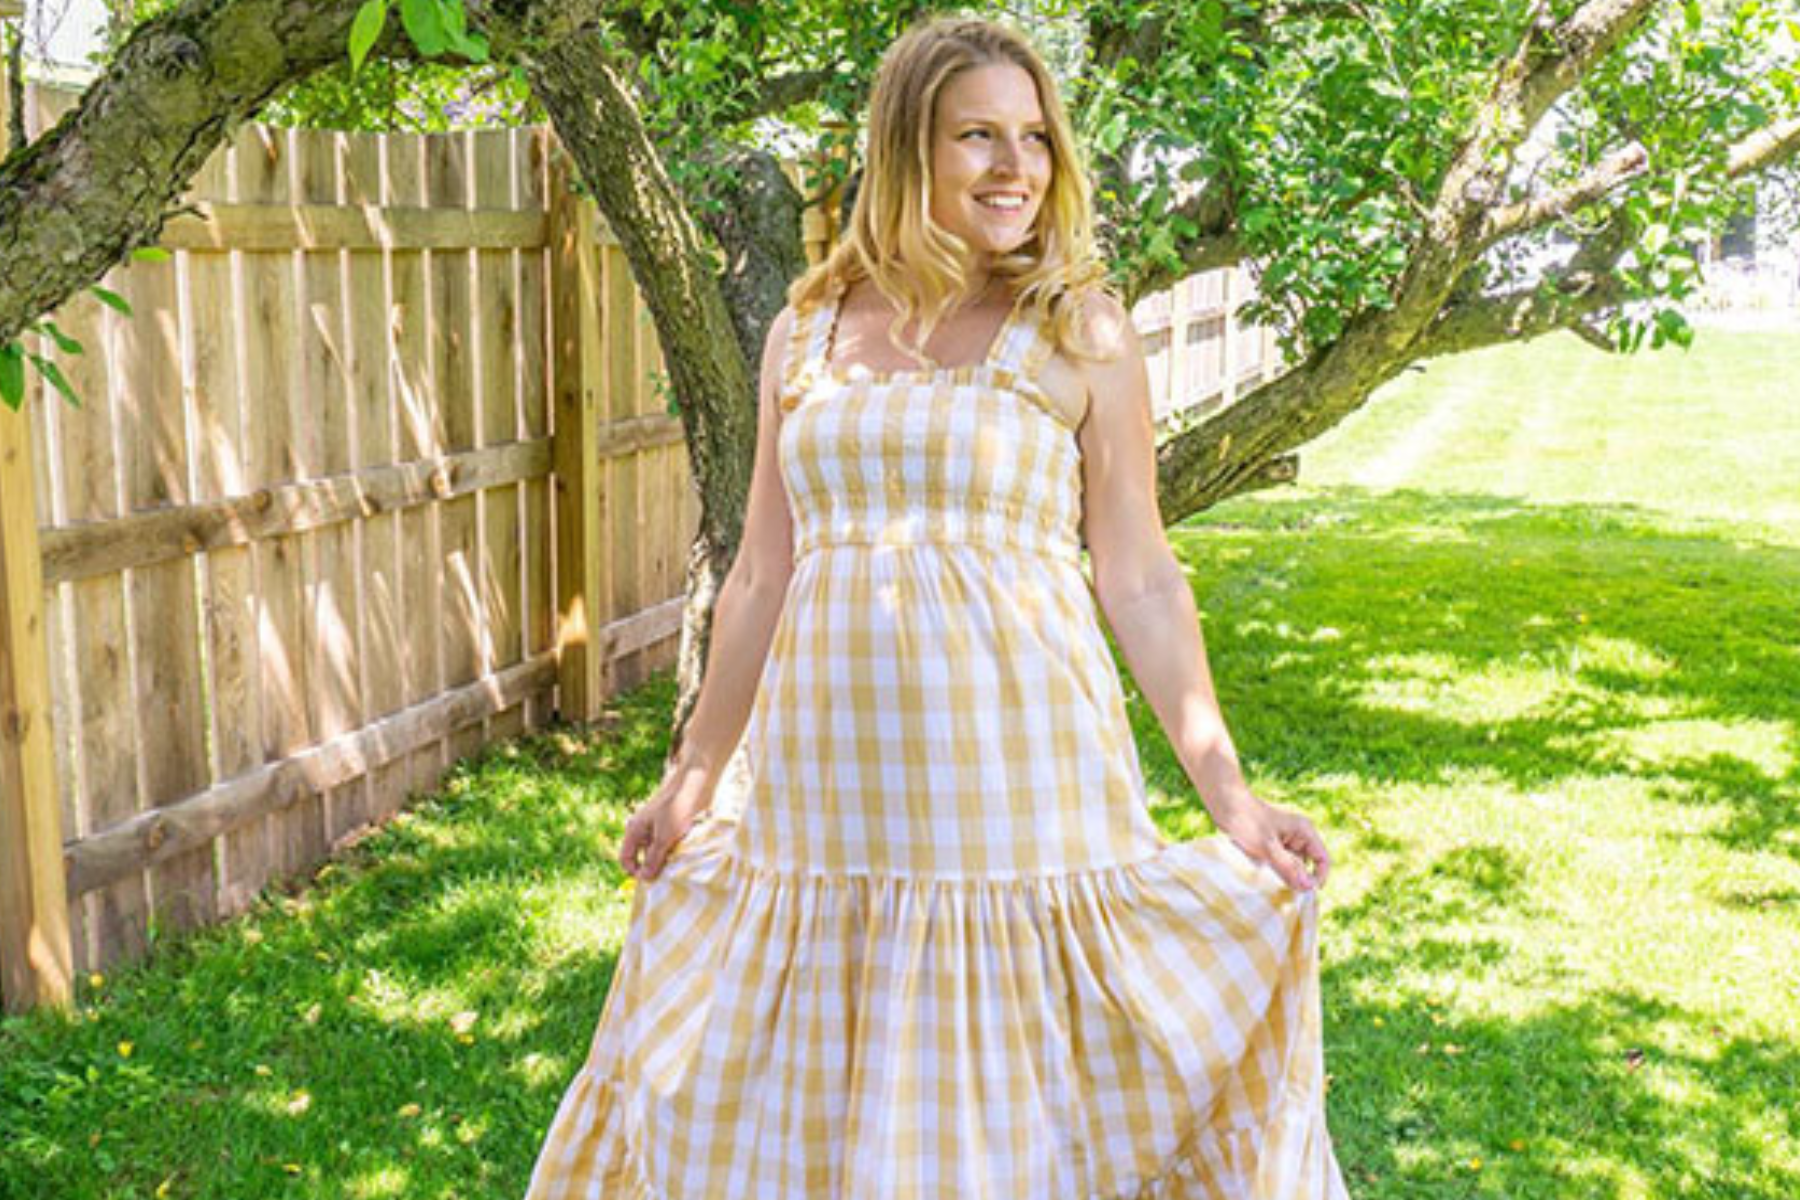 A woman in a yellow checkered dress poses in her backyard